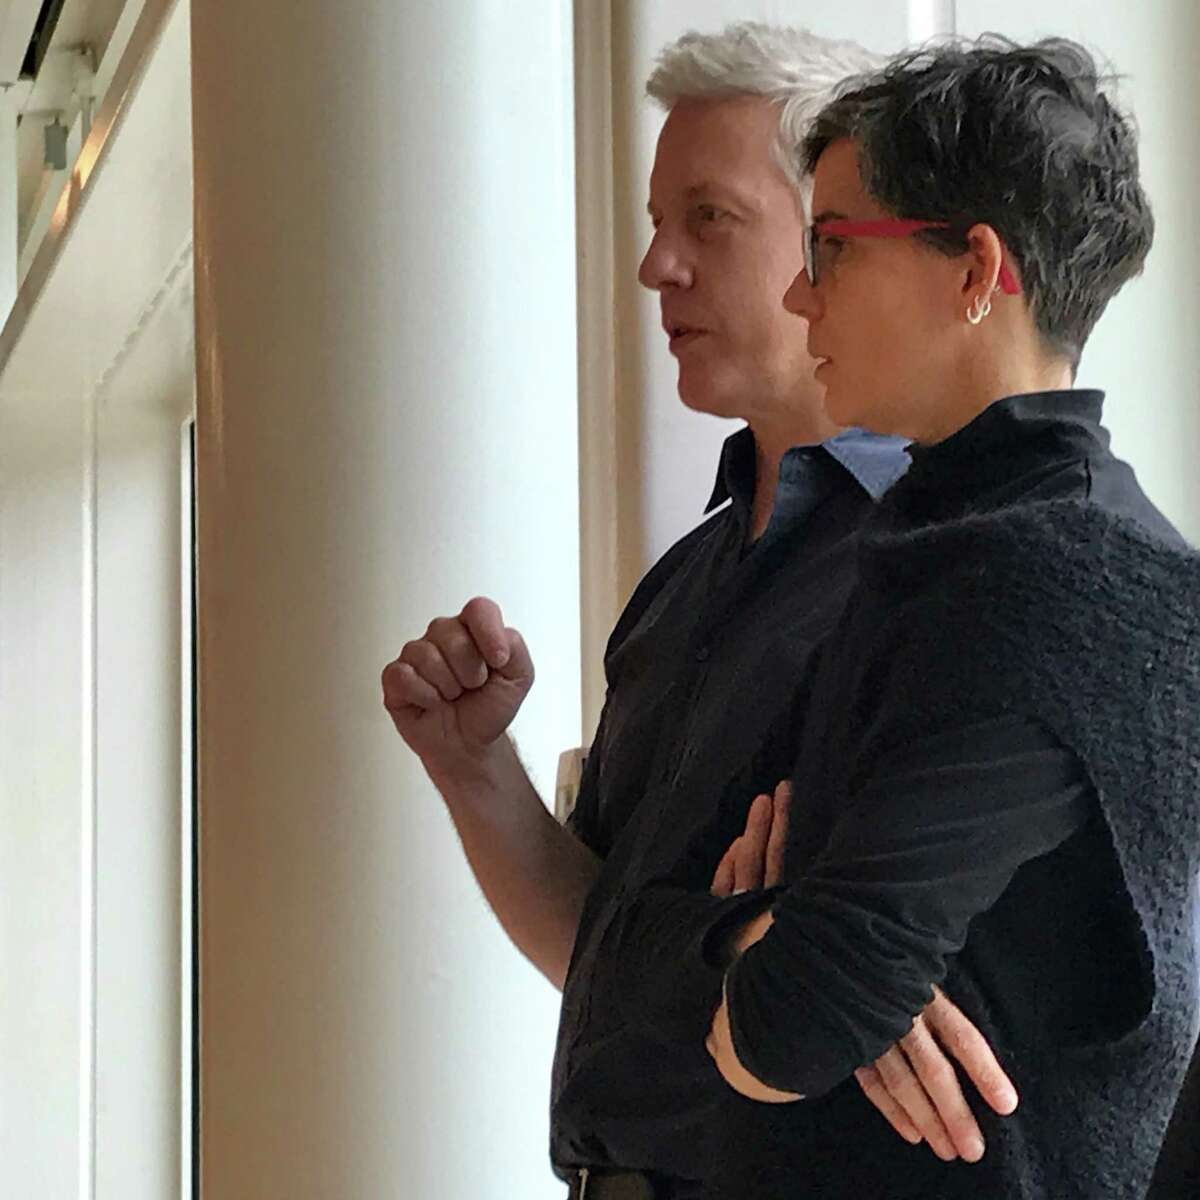 Moody Center artist-in-residence Matthew Ritchie and San Francisco choreographer Hope Mohr confer during a moment of rehearsal for Saturday's performance, "Dimensions Variable," by Mohr's company within Ritchie's installation "Demon in the Diagram."